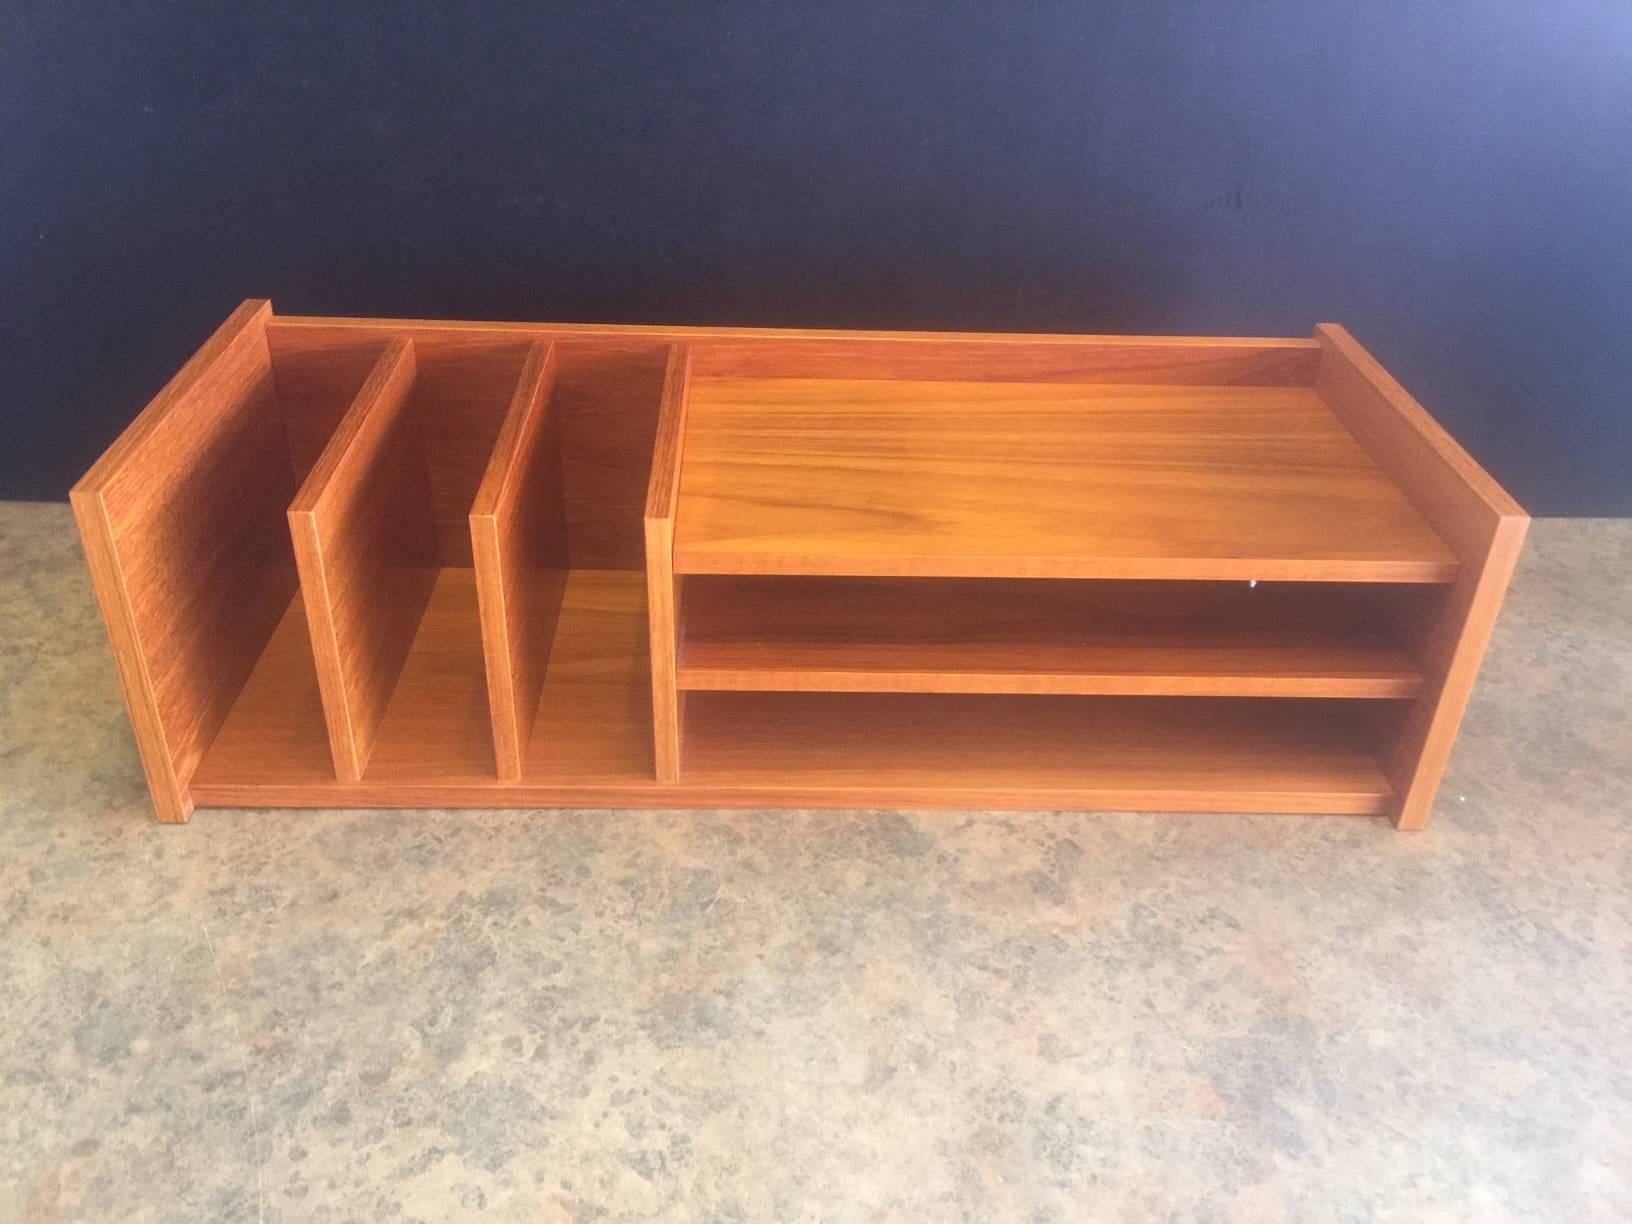 Very functional Danish modern teak desk organizer / letter tray. The piece is in excellent condition and measures 24